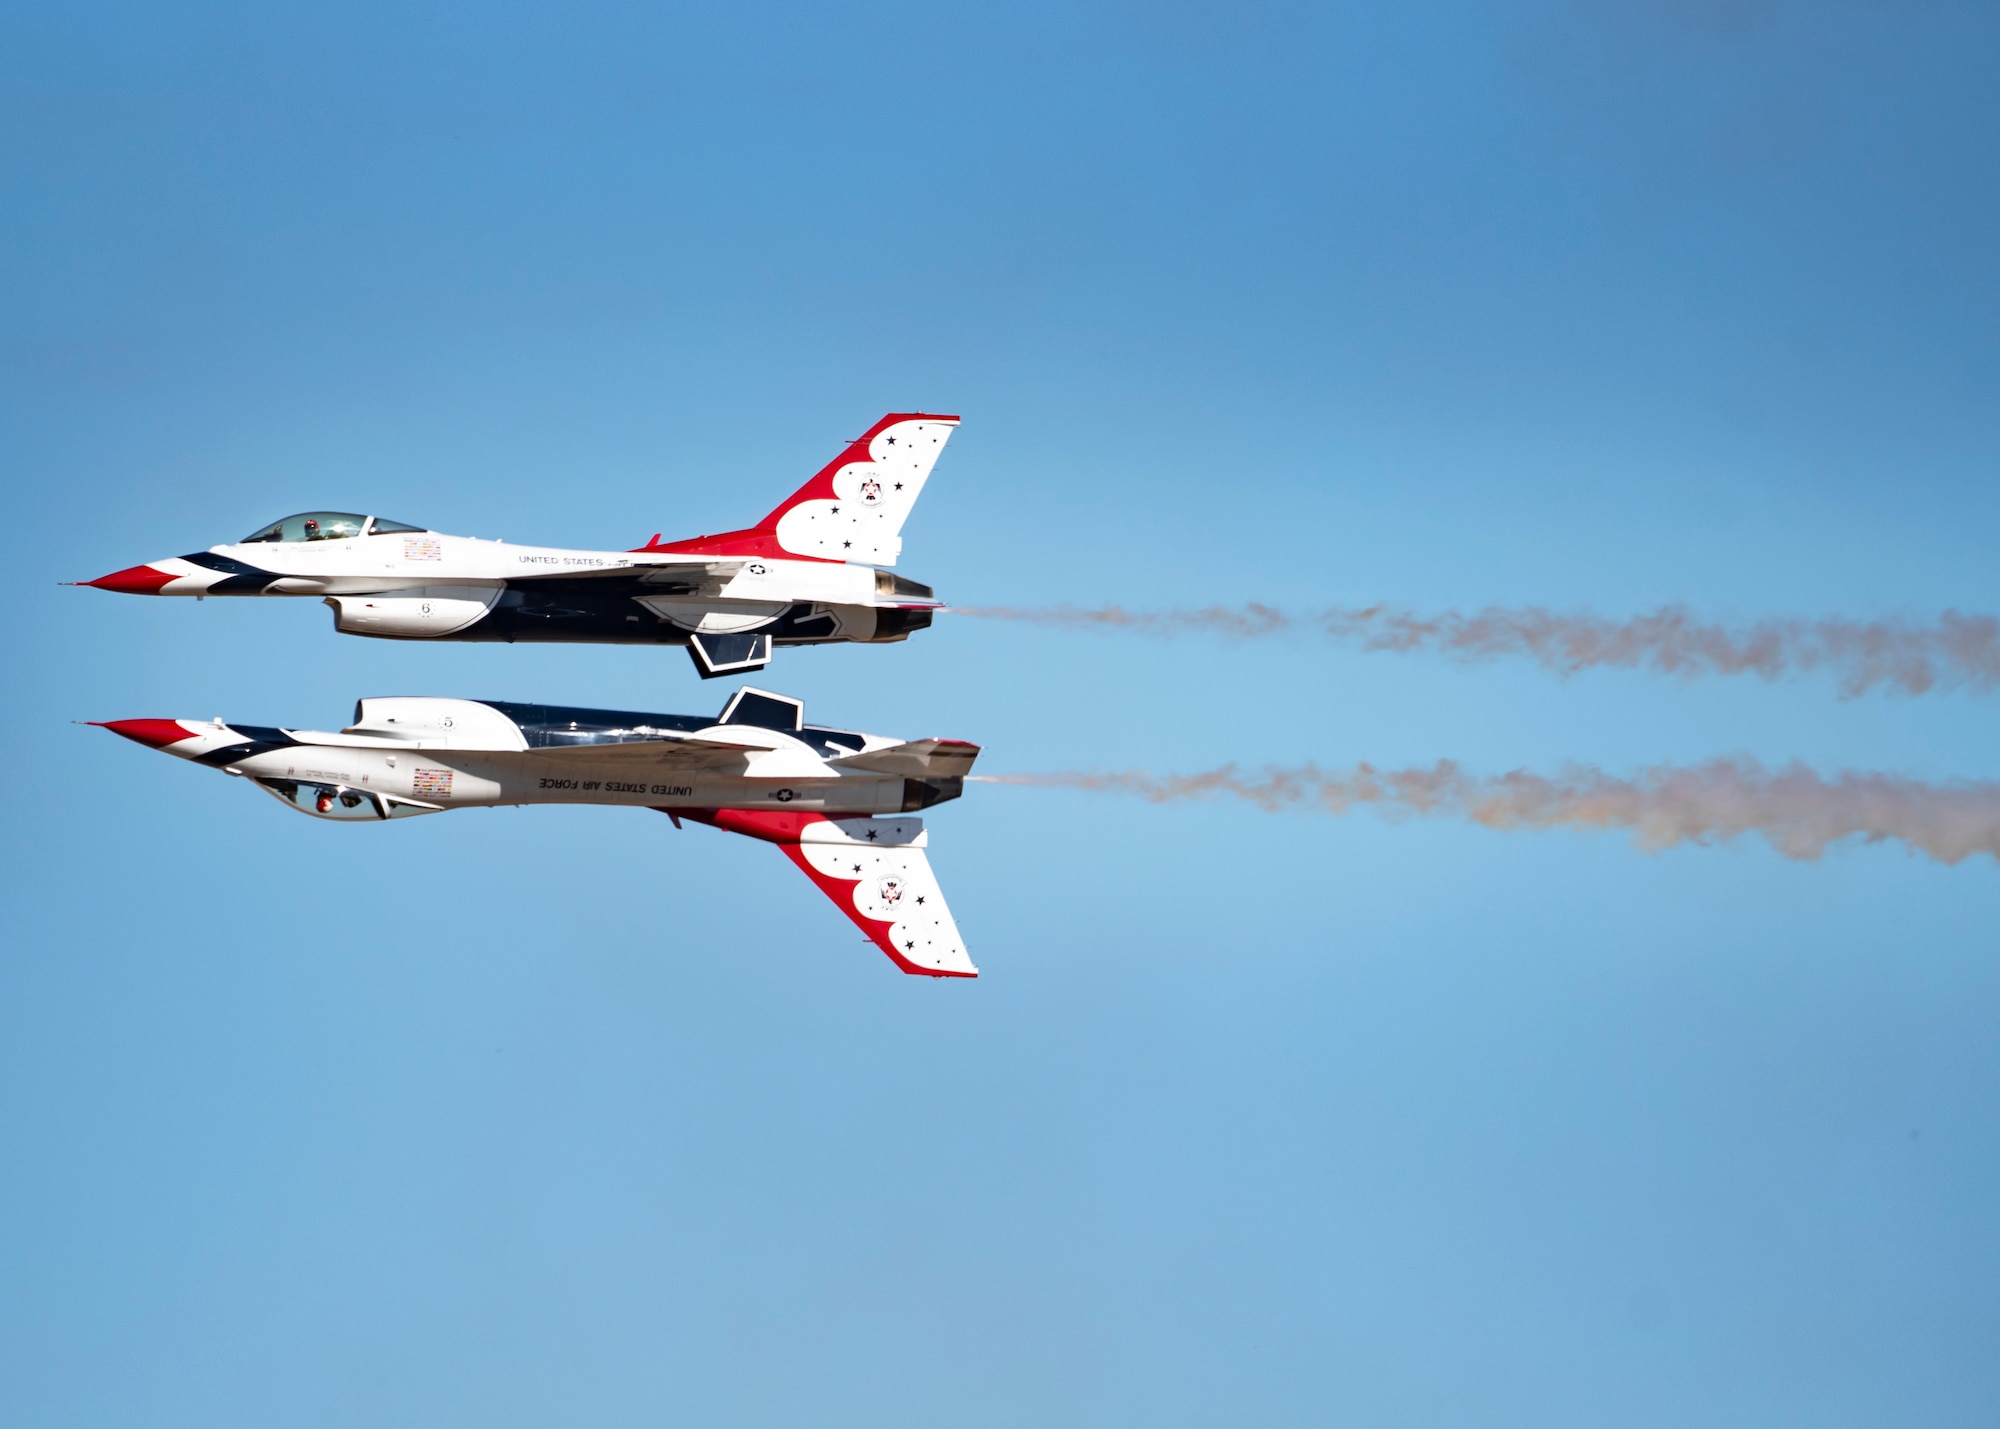 The U.S. Air Force Thunderbirds perform at the Sheppard Air Force Base Guardians of Freedom Air Show at Sheppard Air Force Base, Texas, Oct. 26, 2019. Each year brings another opportunity for the team to represent those who deserve the most credit: the everyday, hard-working Airmen voluntarily serving America and defending freedom. (U.S. Air Force photo by Airman 1st Class Pedro Tenorio)